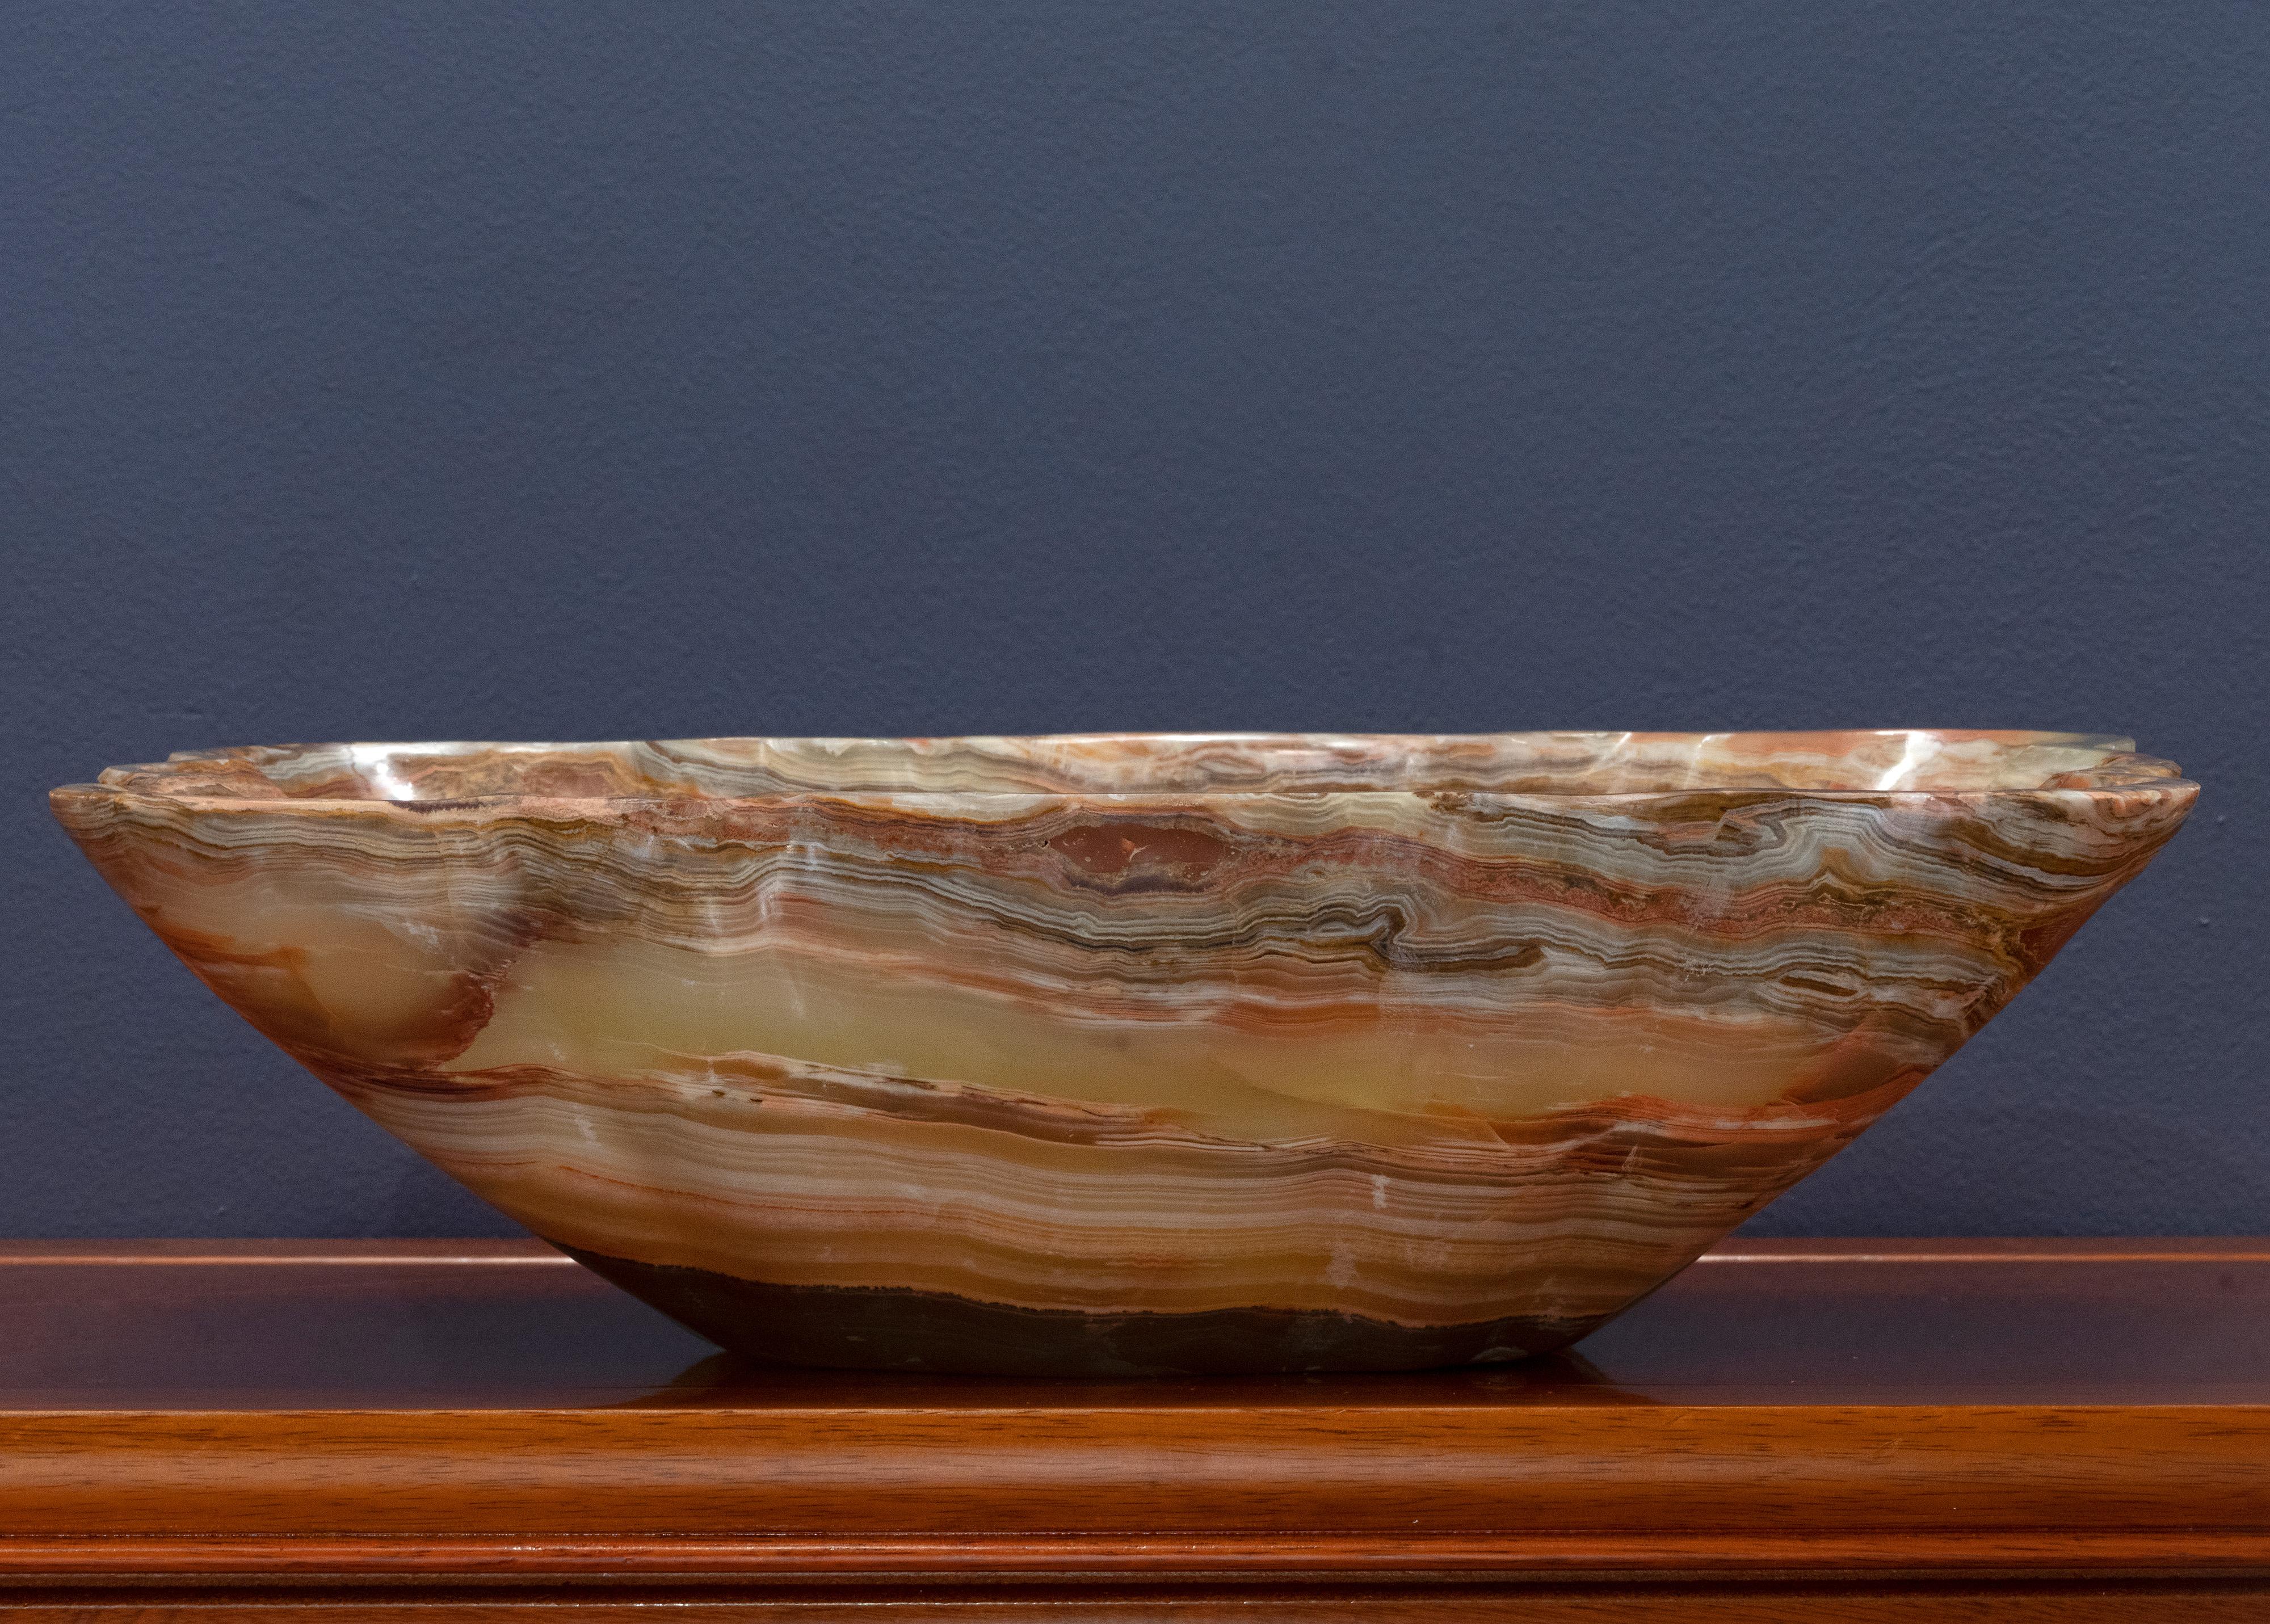 This gorgeously hand-carved 9.5 pound genuine banded onyx scalloped freeform bowl from Pakistan features richly pigmented, concentric bands of brown, green, and tan. This dynamic piece – the perfect size for a centerpiece – has been hand-polished to